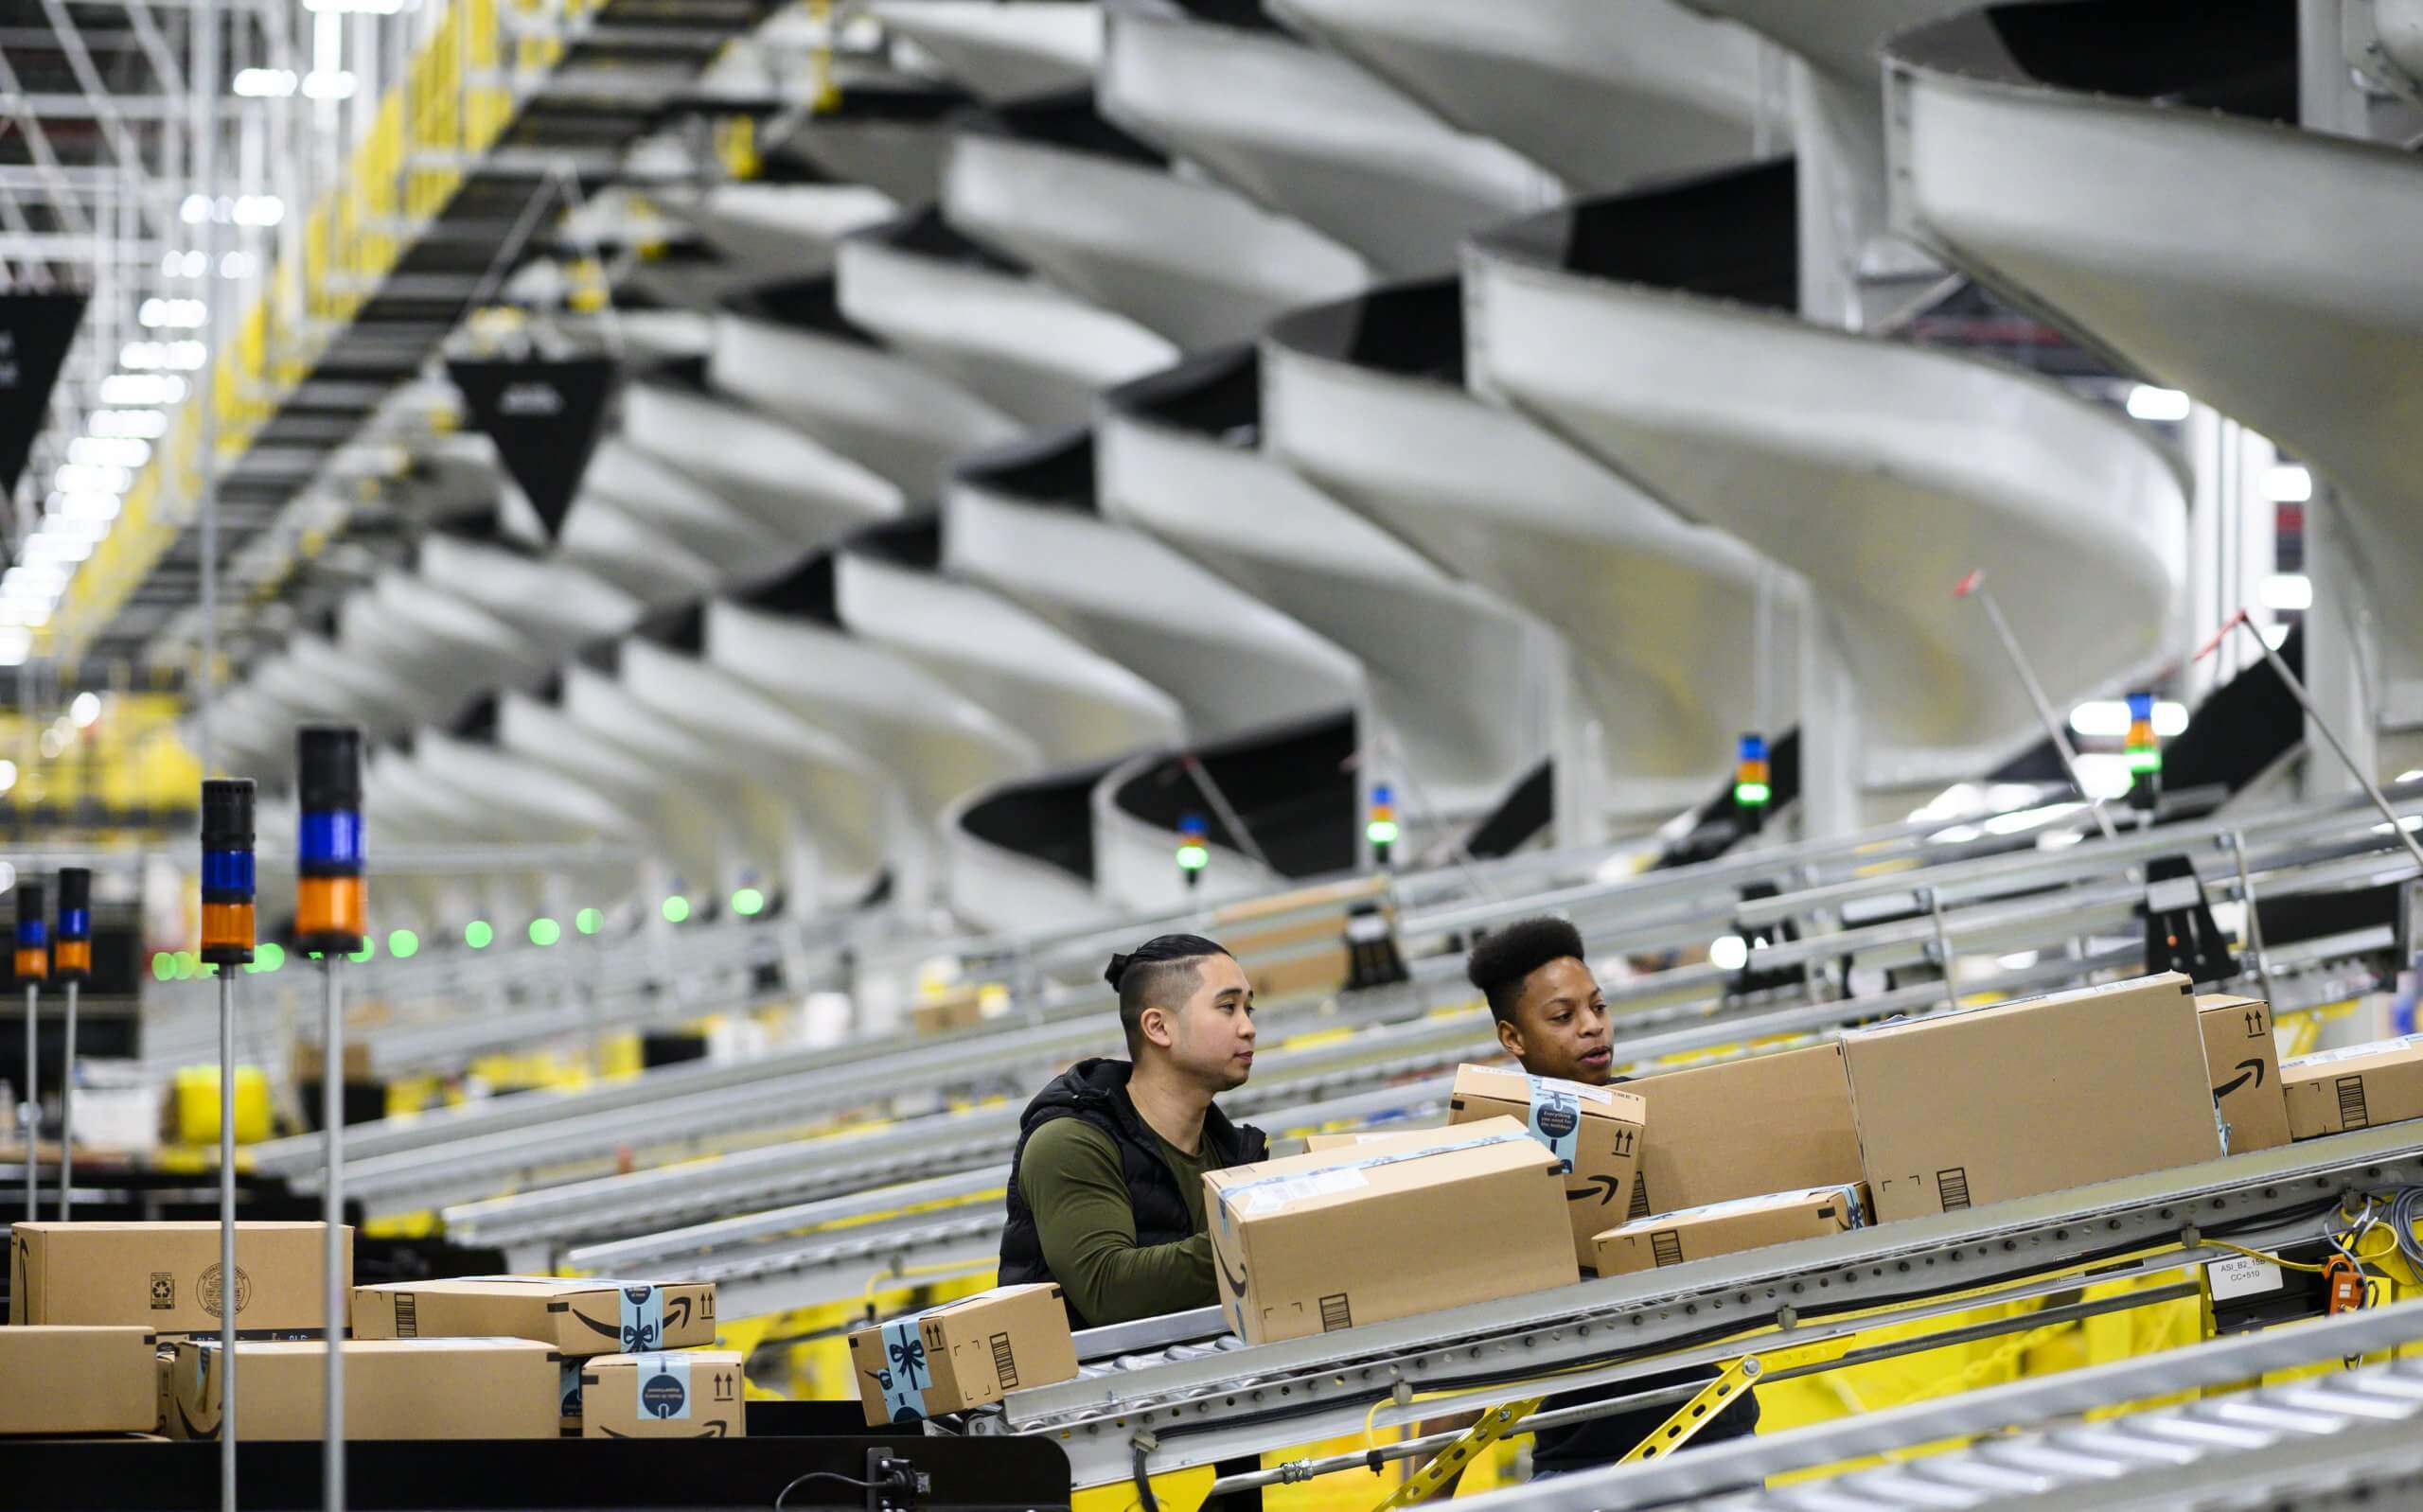 Workers at a distribution station in the 855,000-square-foot Amazon fulfillment center in Staten Island, NY